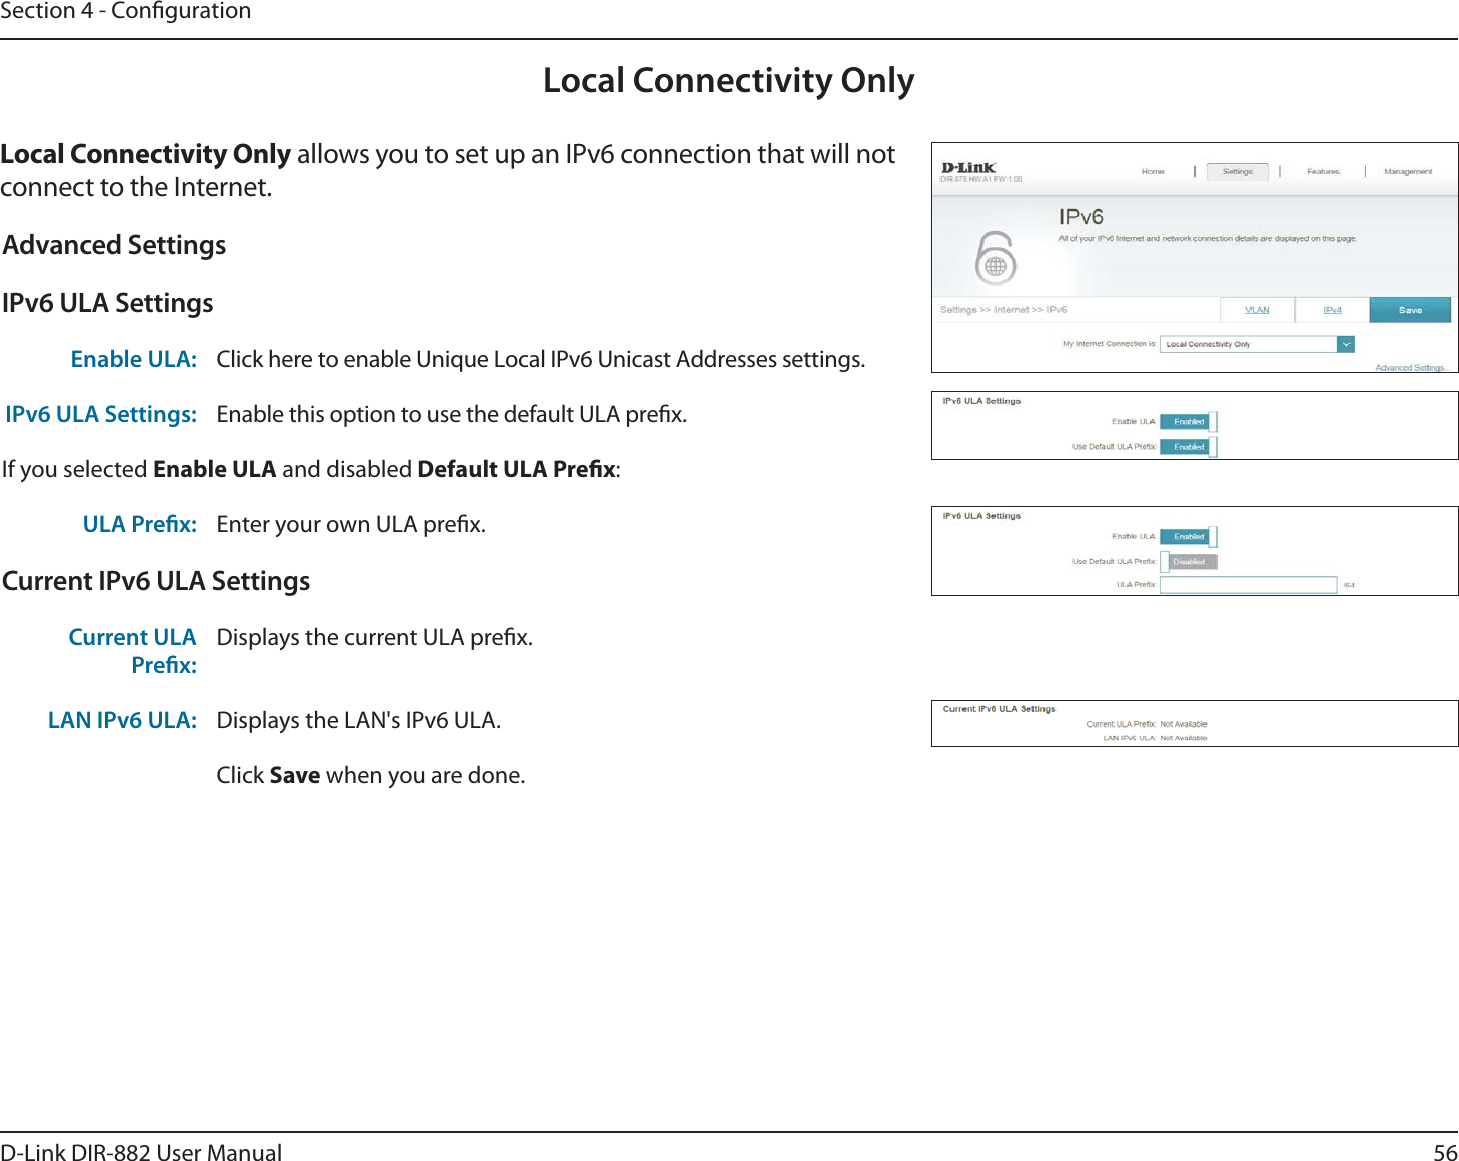 56D-Link DIR-882 User ManualSection 4 - CongurationLocal Connectivity Only-PDBM$POOFDUJWJUZ0OMZ allows you to set up an IPv6 connection that will not connect to the Internet.Advanced SettingsIPv6 ULA SettingsEnable ULA: Click here to enable Unique Local IPv6 Unicast Addresses settings.IPv6 ULA Settings: Enable this option to use the default ULA prex.If you selected &amp;OBCMF6-&quot; and disabled%FGBVMU6-&quot;1SFöY:ULA Prex: Enter your own ULA prex.Current IPv6 ULA SettingsCurrent ULA Prex:Displays the current ULA prex. LAN IPv6 ULA: Displays the LAN&apos;s IPv6 ULA.Click Save when you are done.